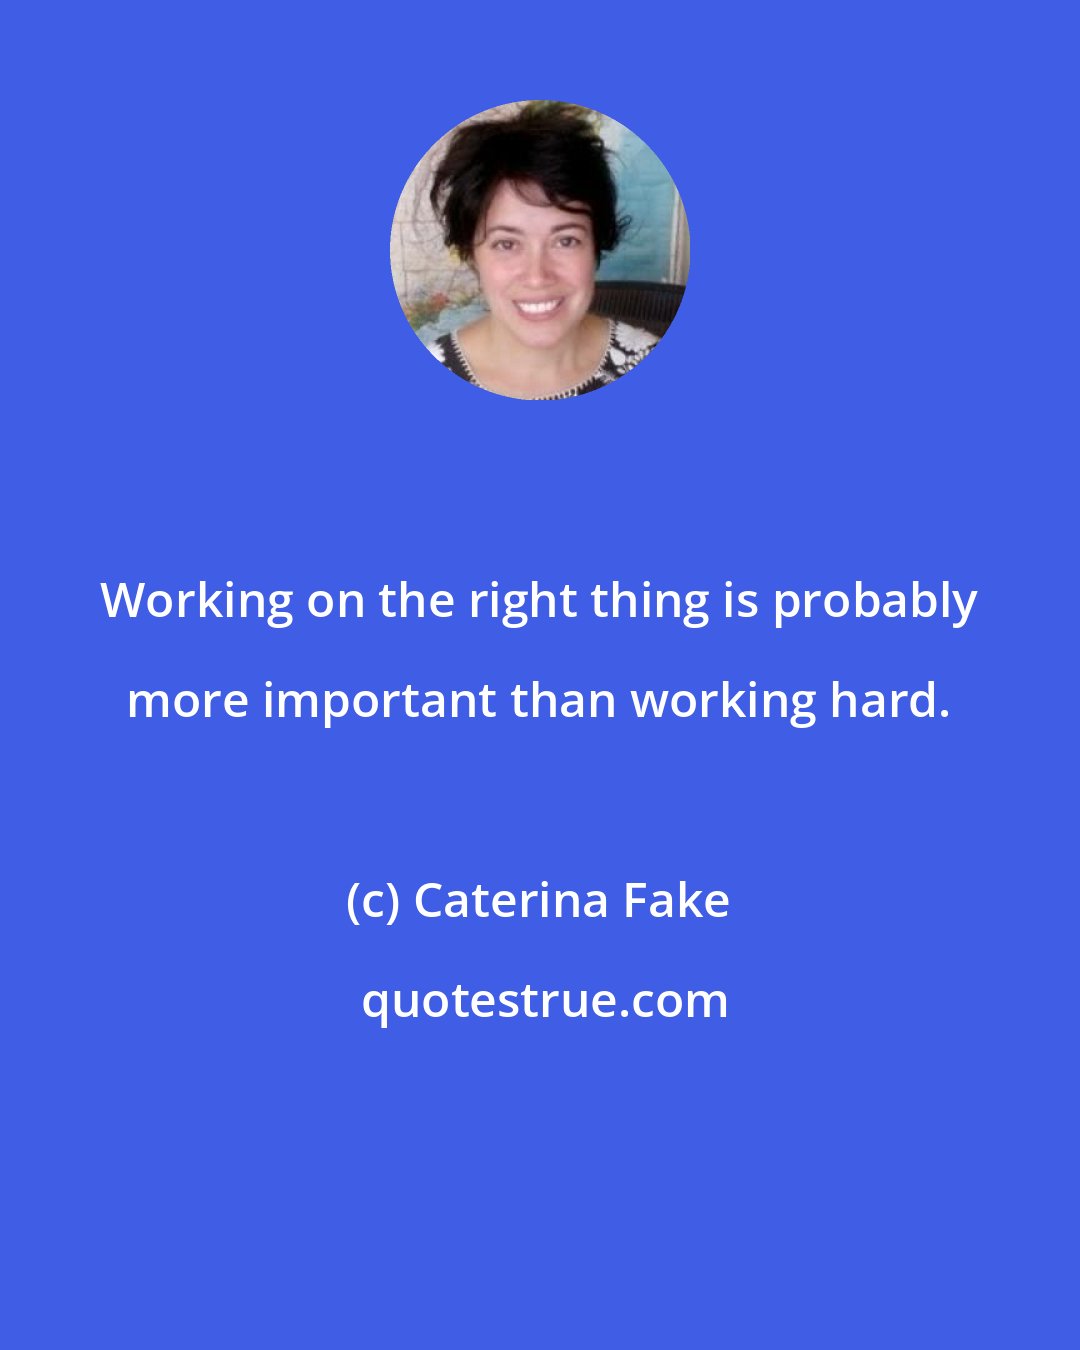 Caterina Fake: Working on the right thing is probably more important than working hard.